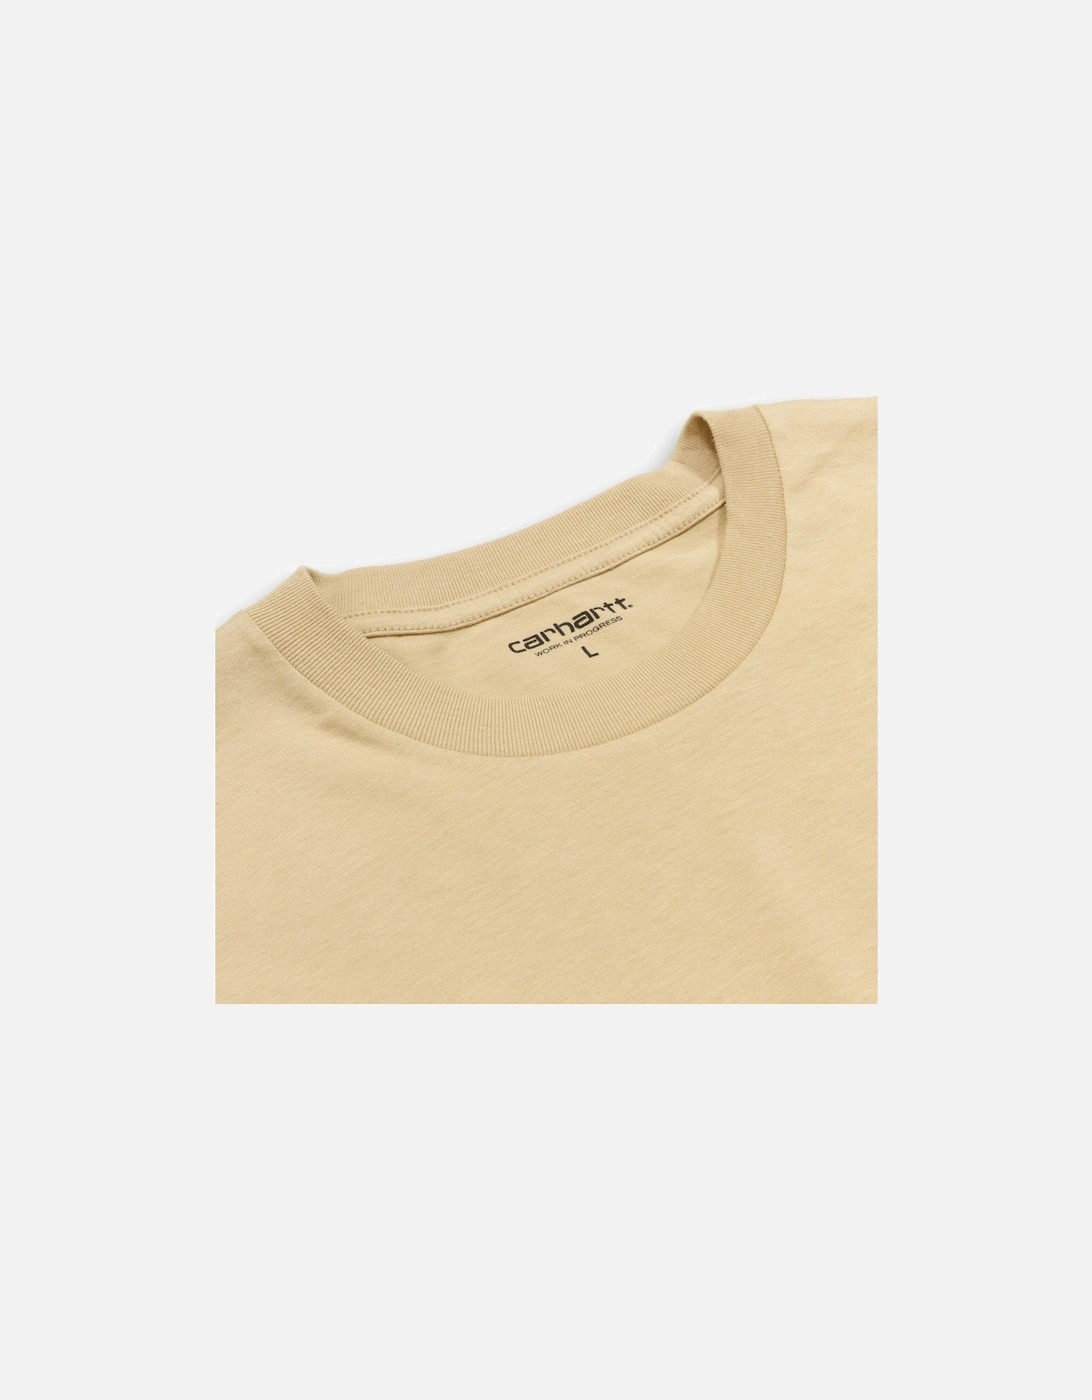 Ink Bleed T-Shirt - Sable/Tobacco